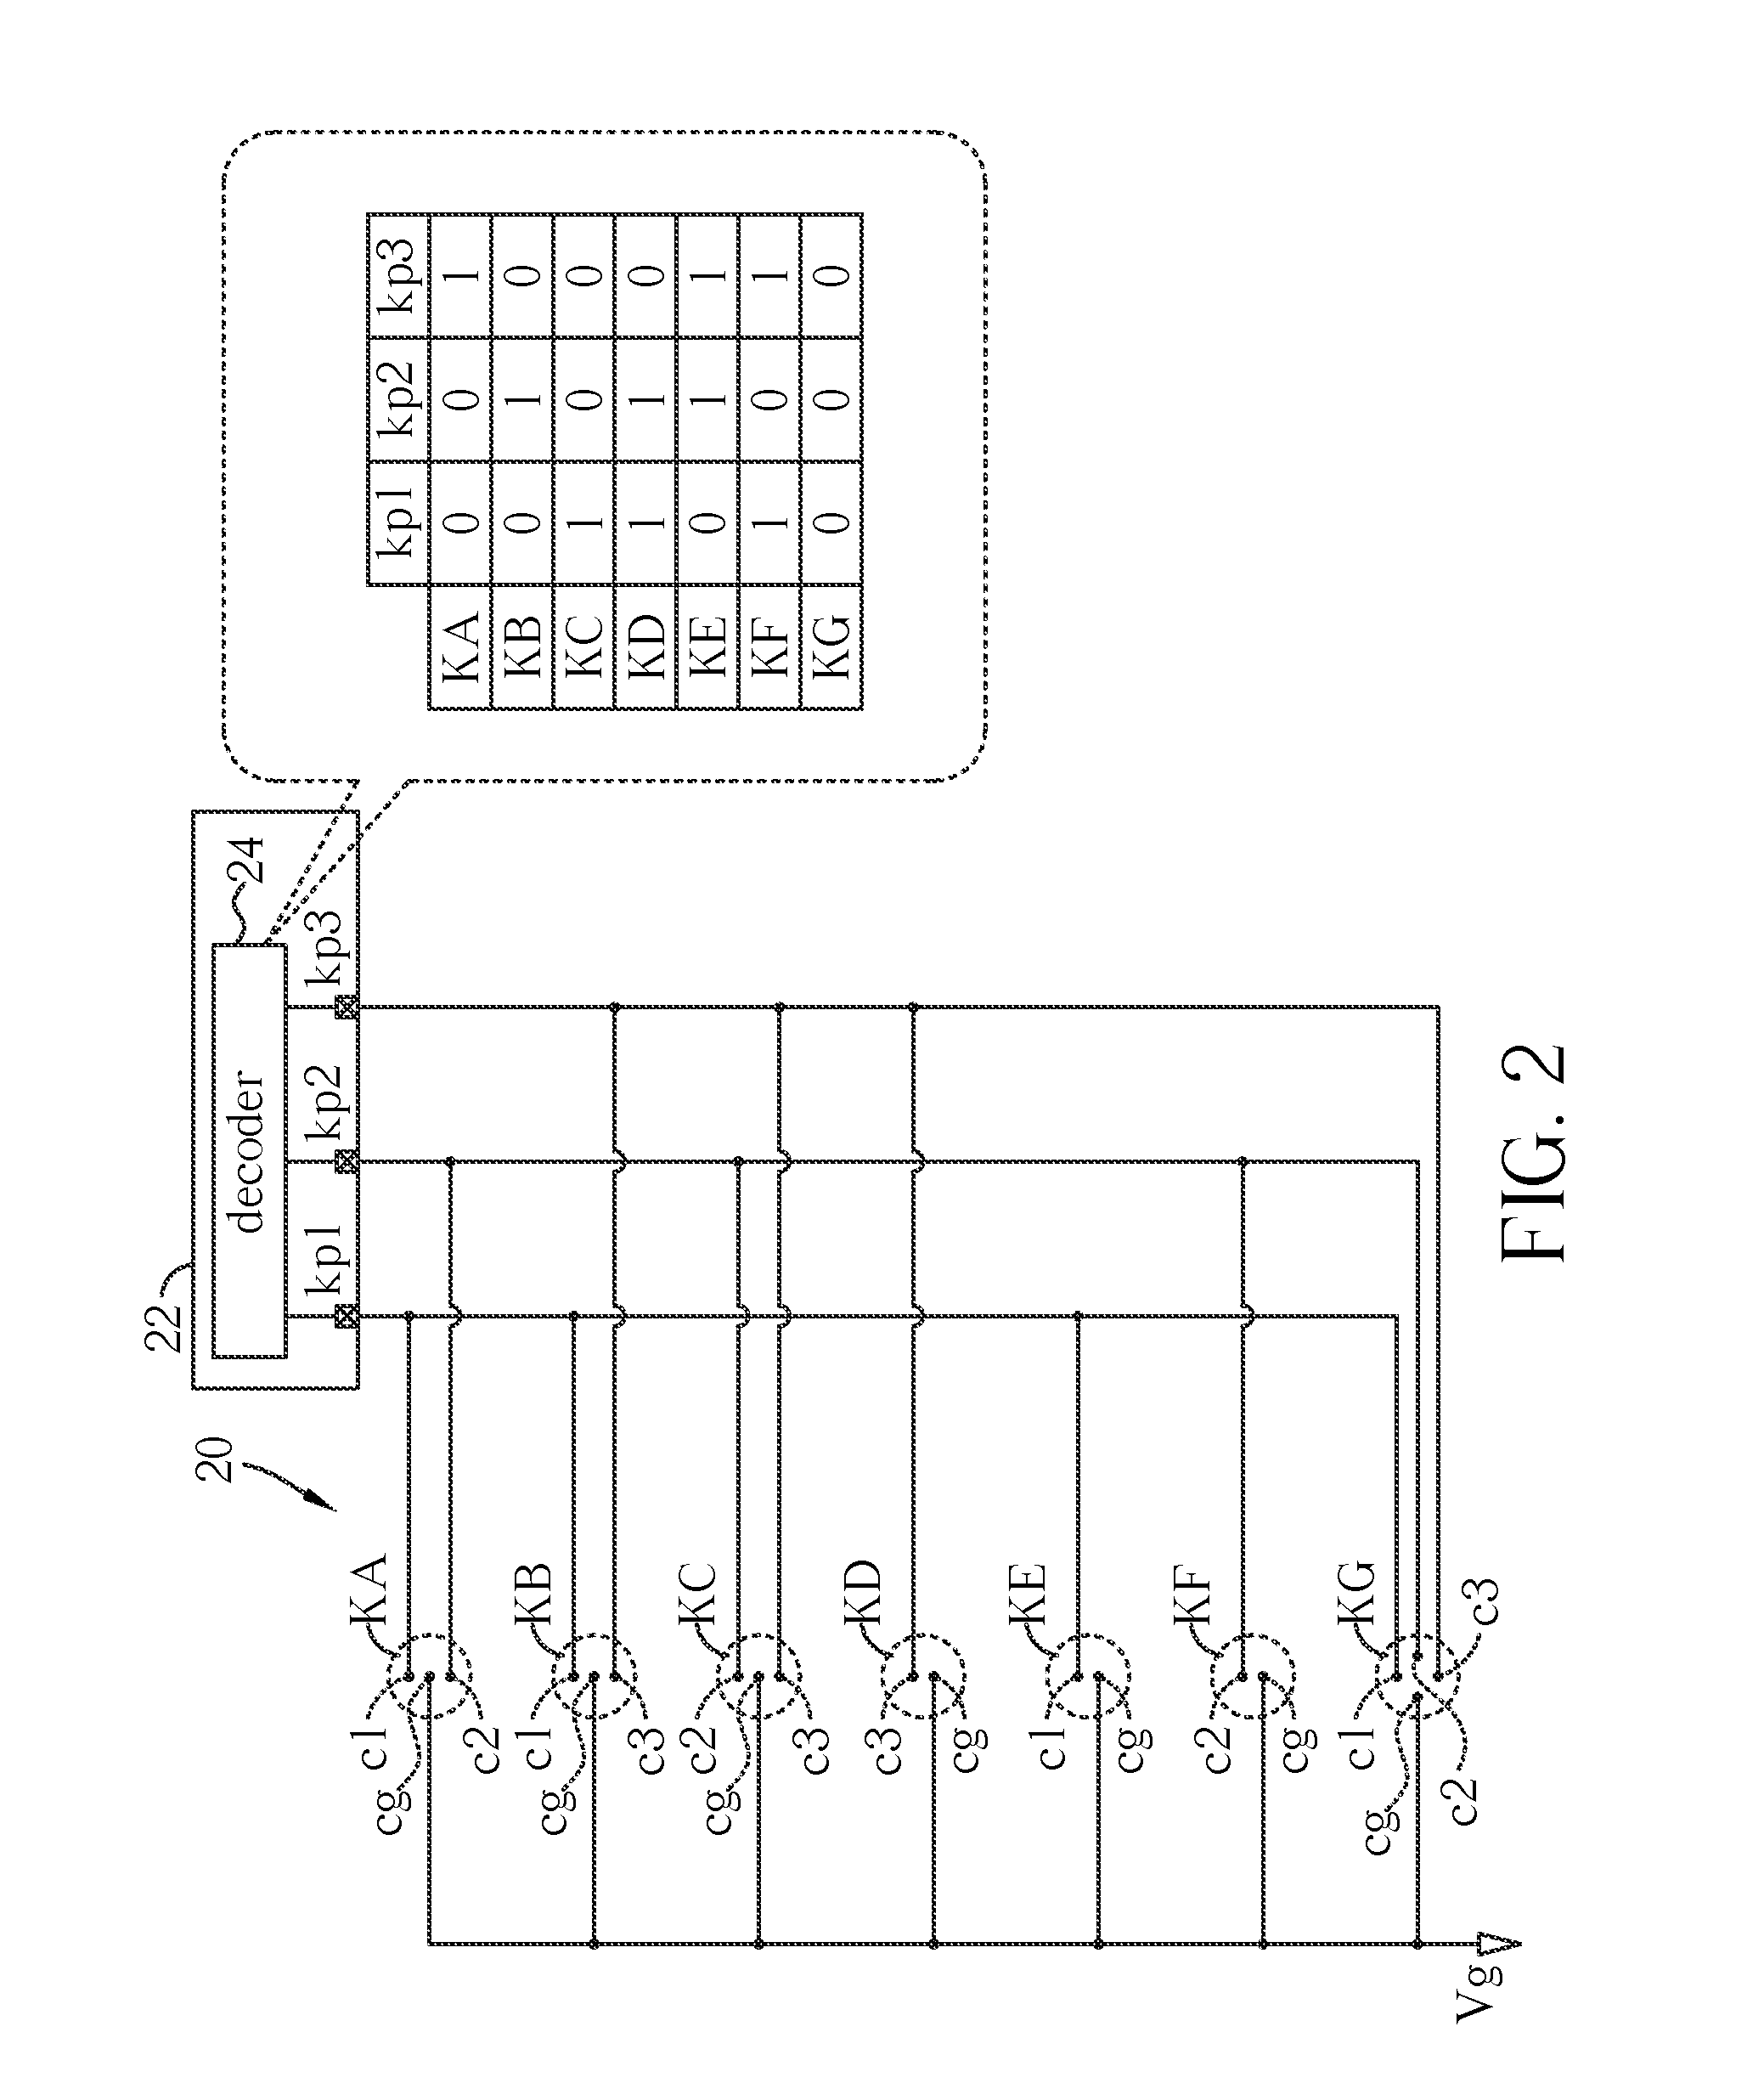 Circuit and associated method identifying keys and implementing keypad